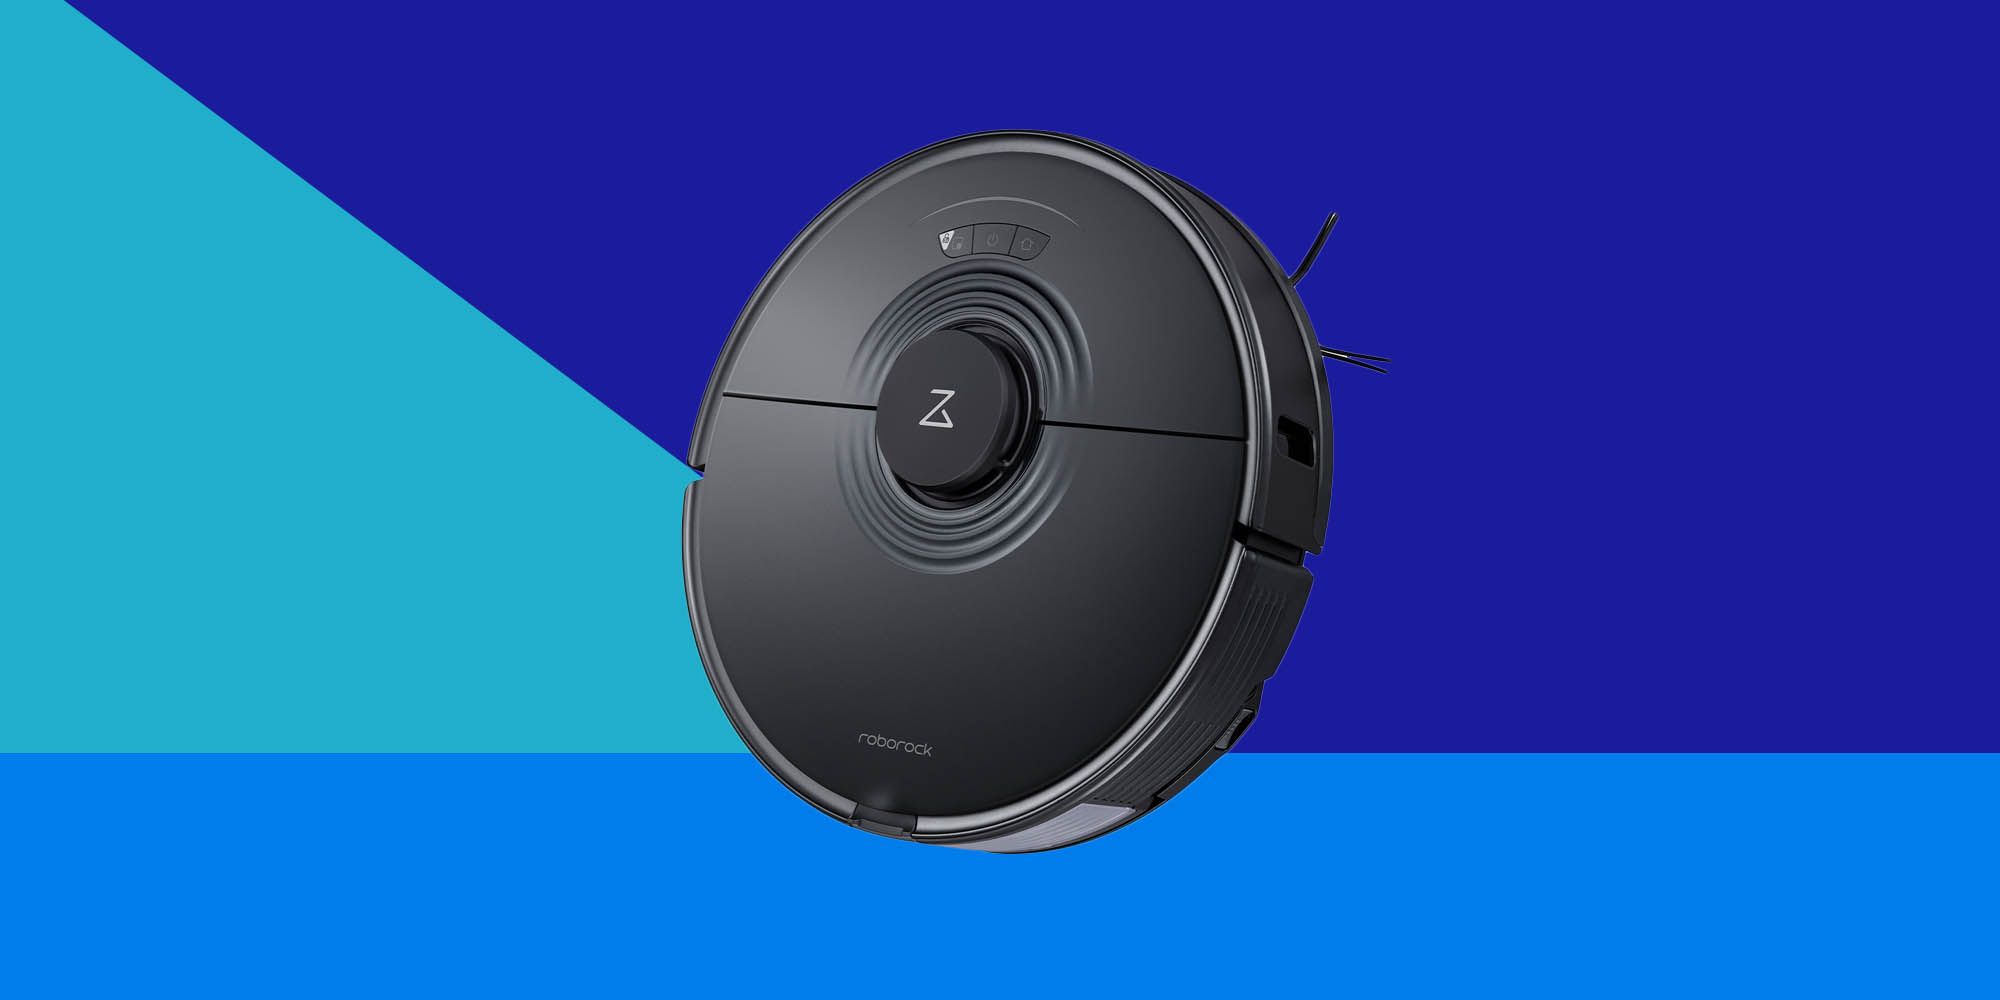 Ditch Your Mop: The Roborock S7 Is Here